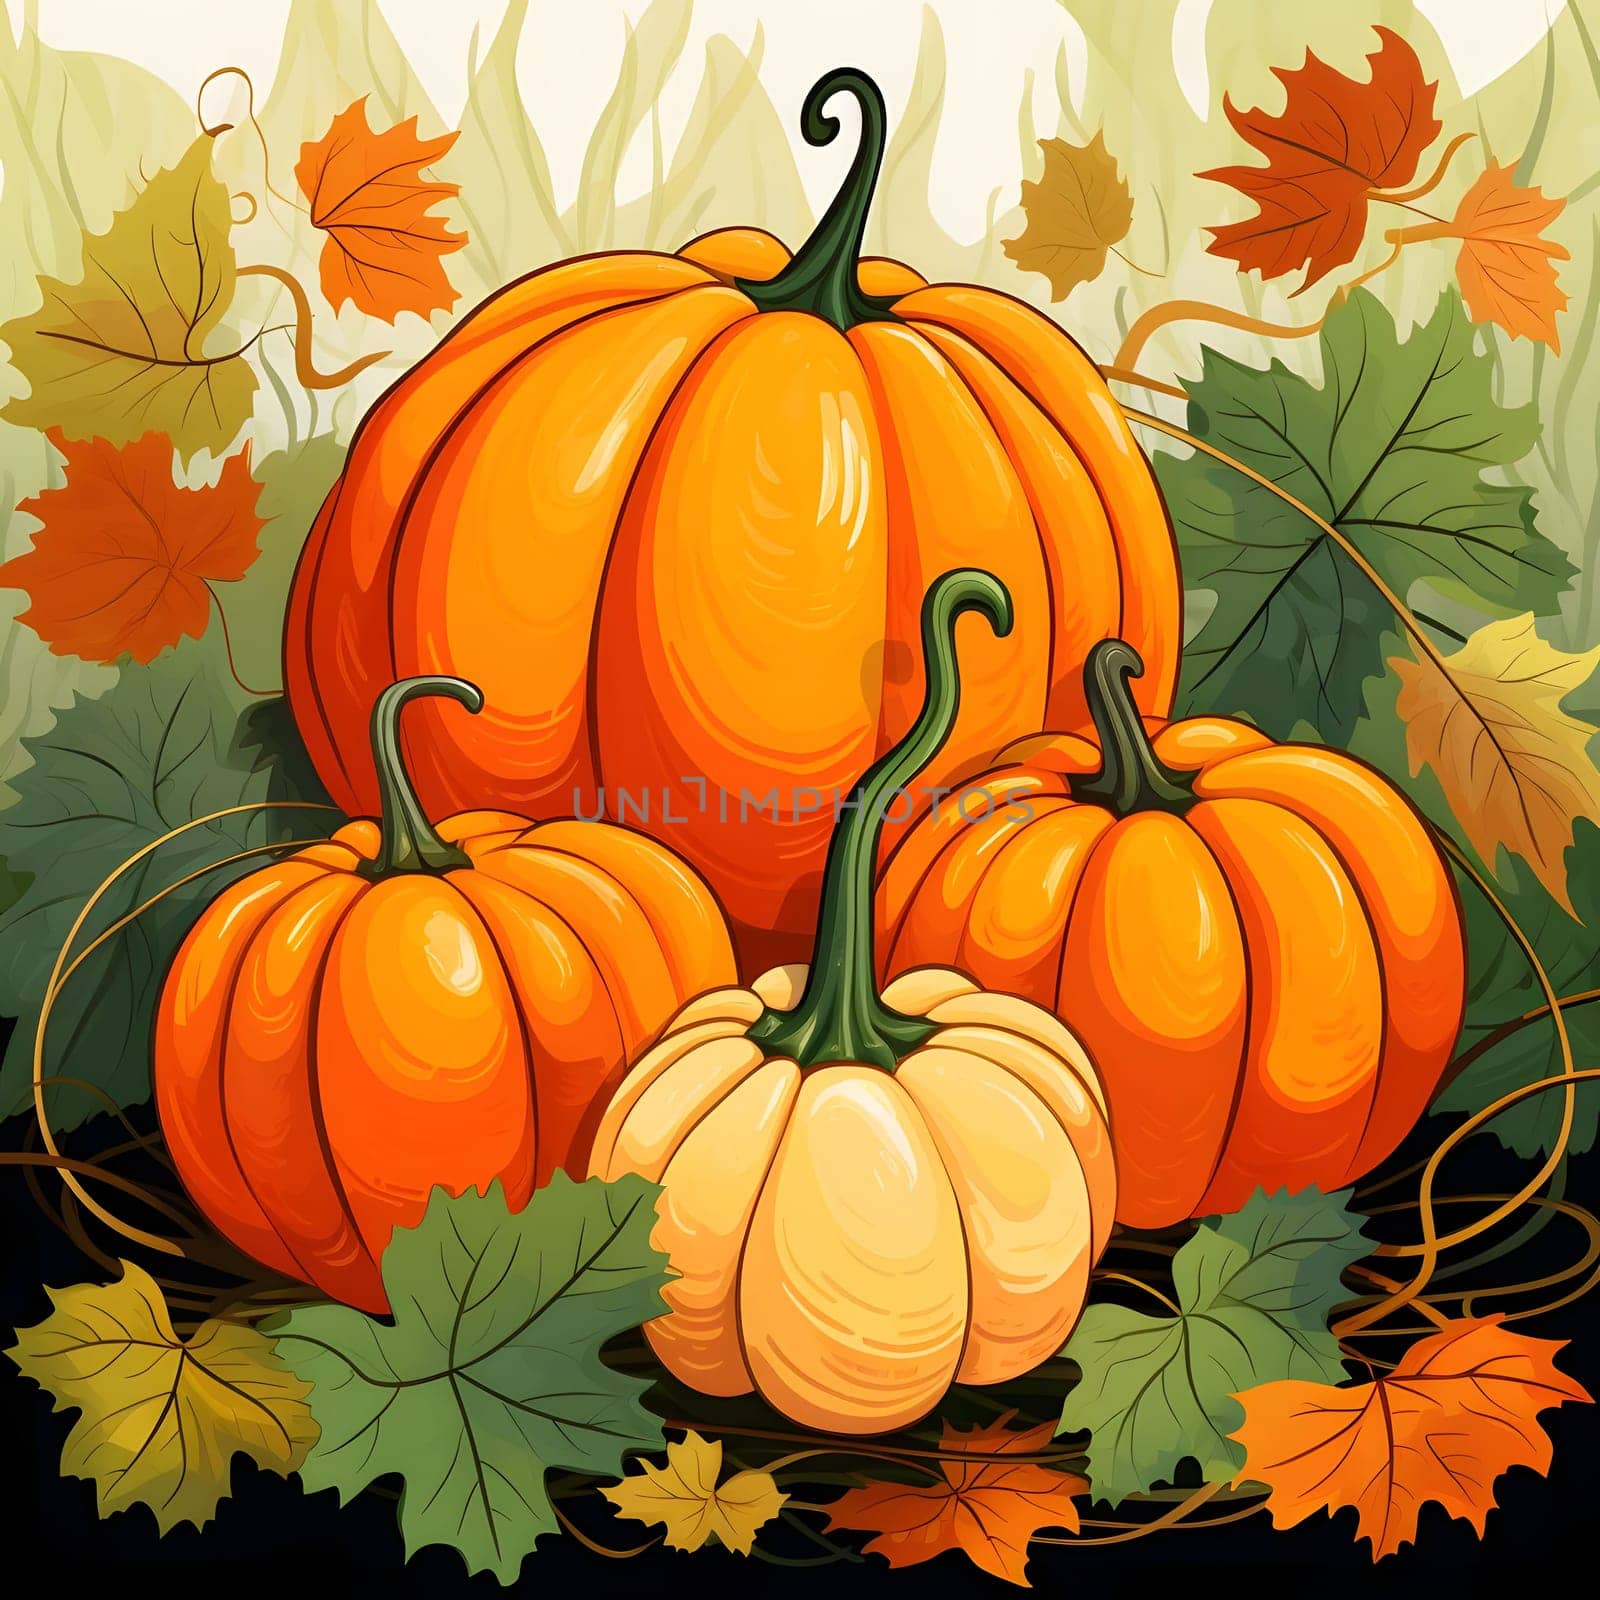 Four orange pumpkins, around leaves autumn illustration. Pumpkin as a dish of thanksgiving for the harvest. The atmosphere of joy and celebration.